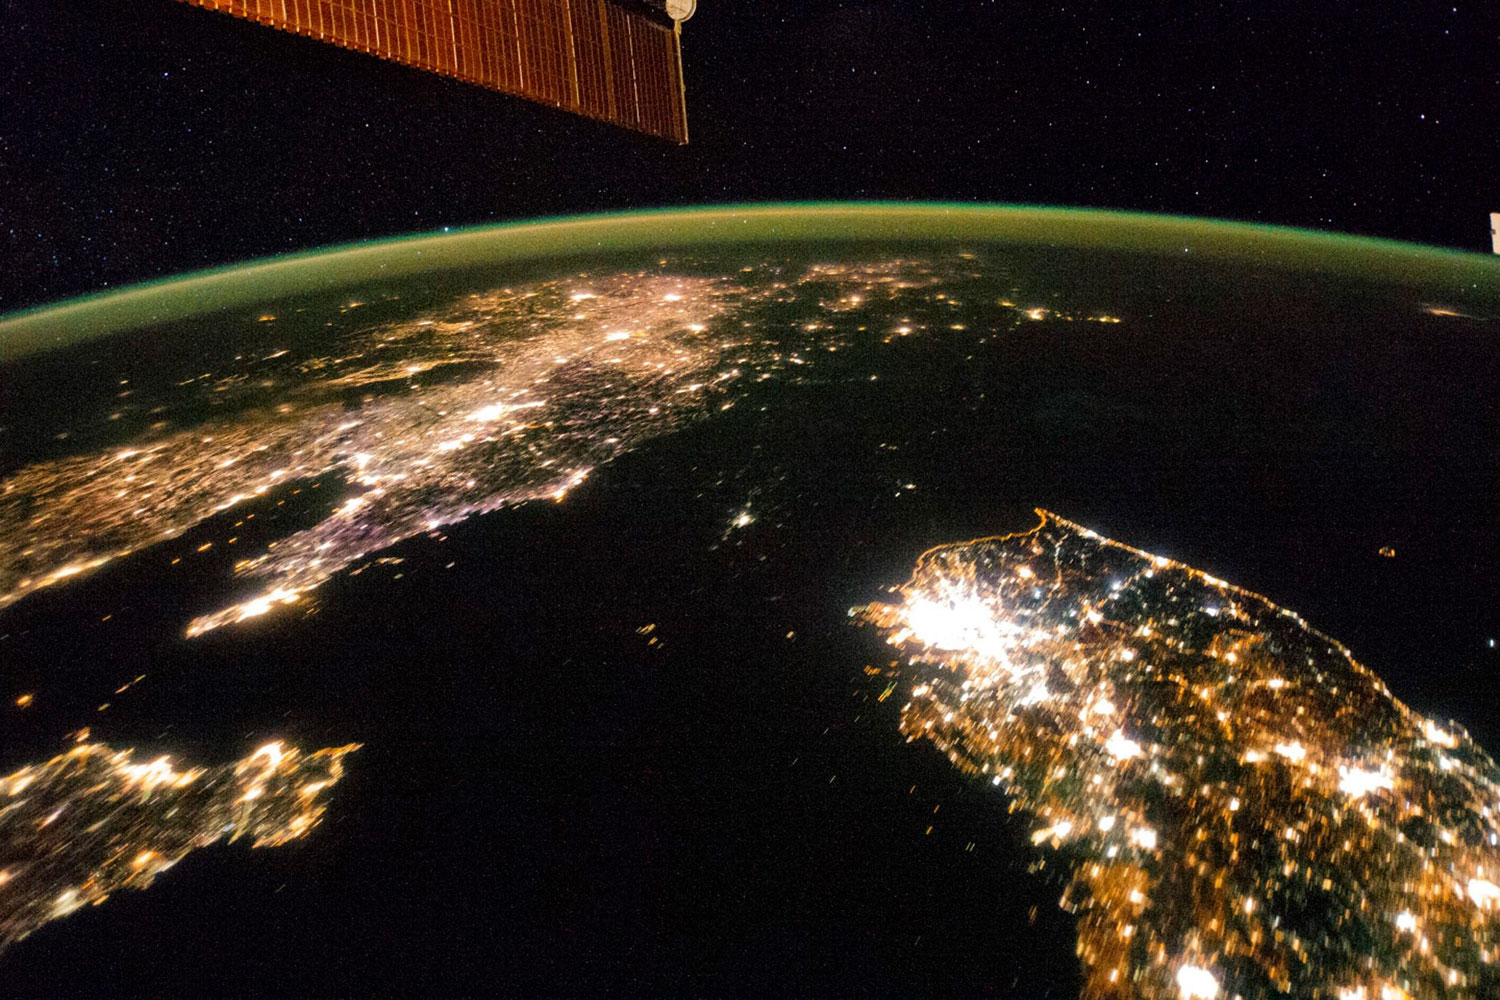 A NASA image released on February 24, 2014 shows a photo taken by the Expedition 38 crew aboard the International Space Station (ISS) on January 30, 2014, of the night view of the Korean Peninsula. The dark stretch in the middle is North Korea, with only the capital, Pyongyang, lit. Neighboring South Korea (bottom right) and China (top left) blaze with light.